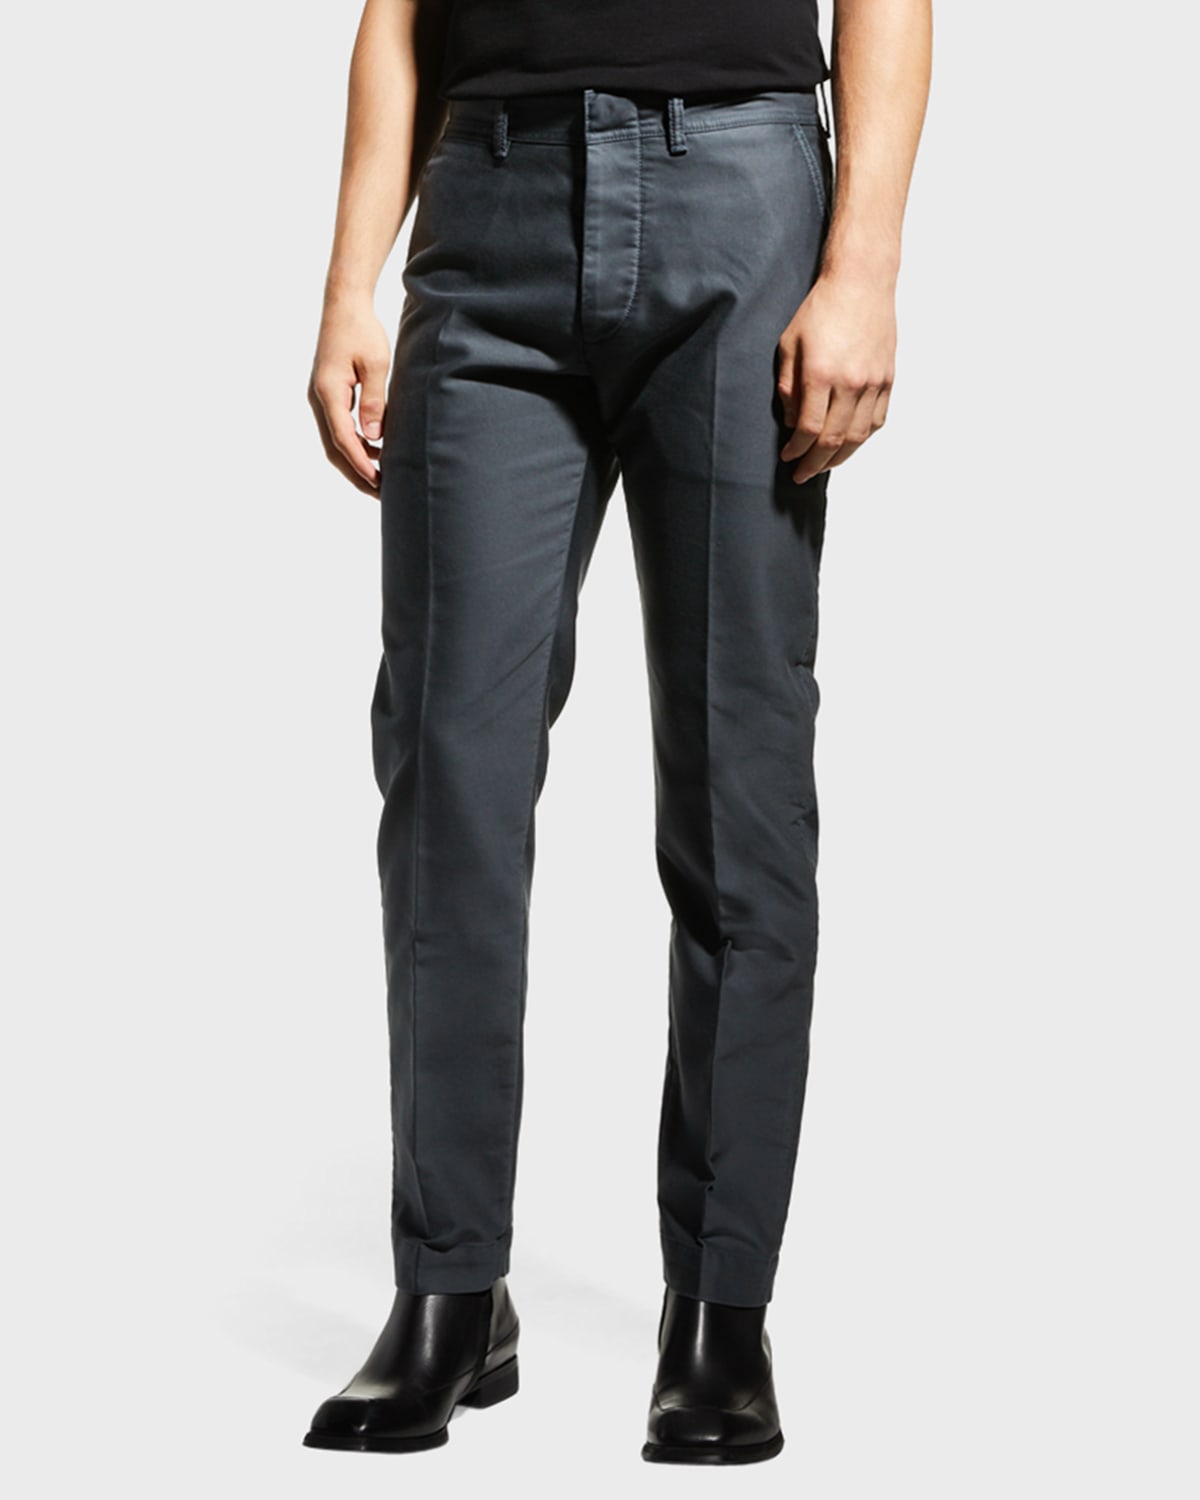 Tom Ford Men's Garment-washed Chino Sport Pants In Dark Blue Solid